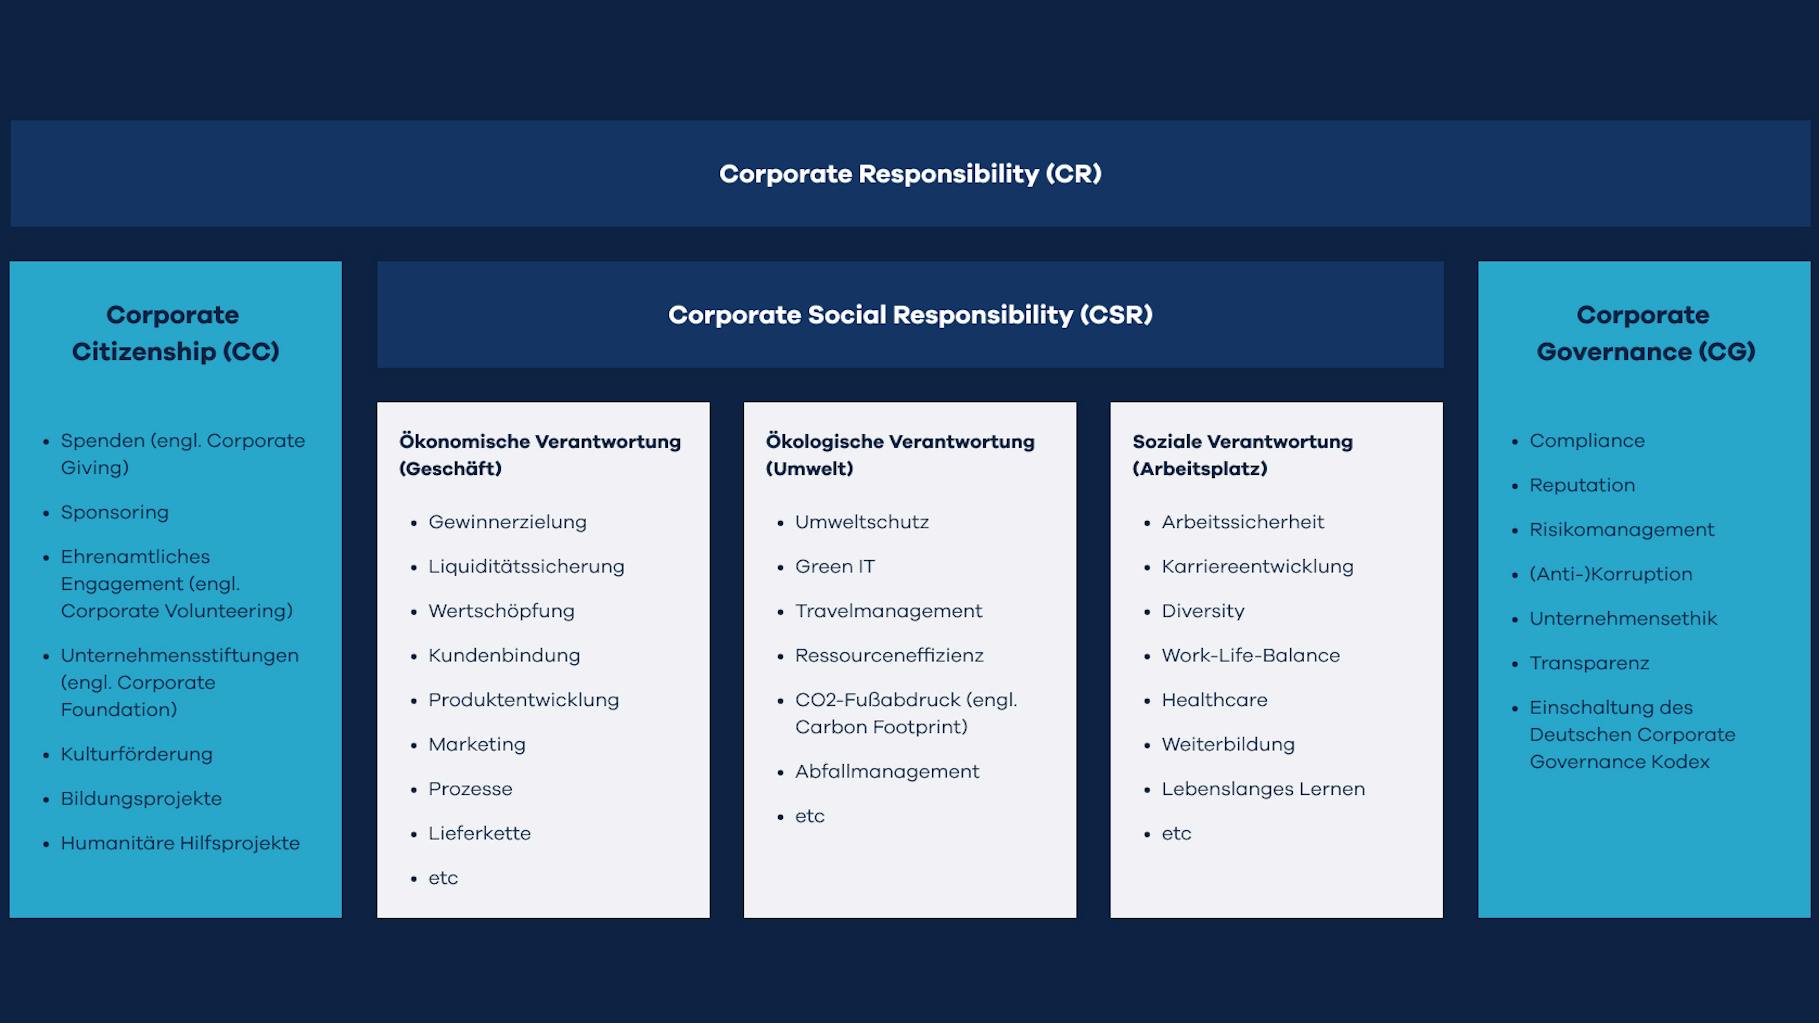 For us, a holistic consulting approach entails thinking in terms of comprehensive corporate responsibility (CR), which complements CSR with corporate citizenship (CC) and corporate governance (CG).